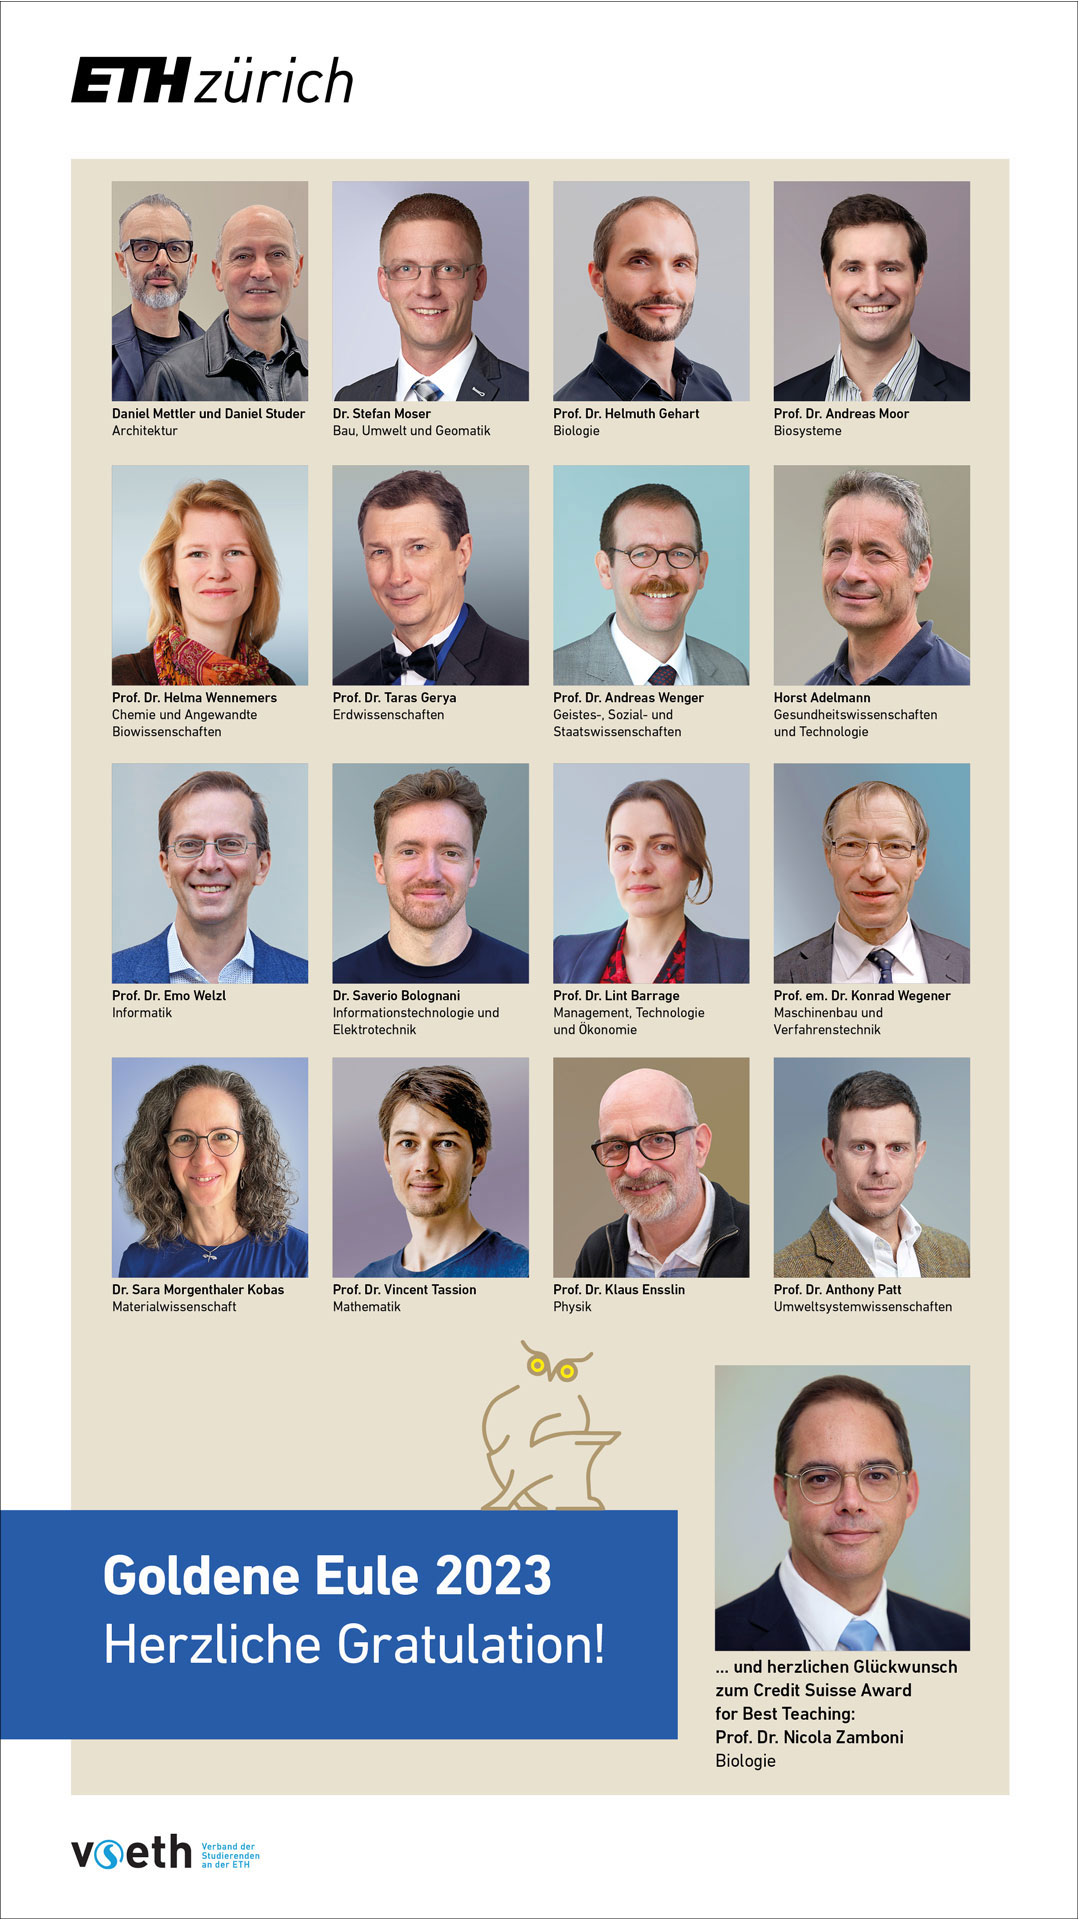 Enlarged view: Poster with the winners of the golden owl 2023